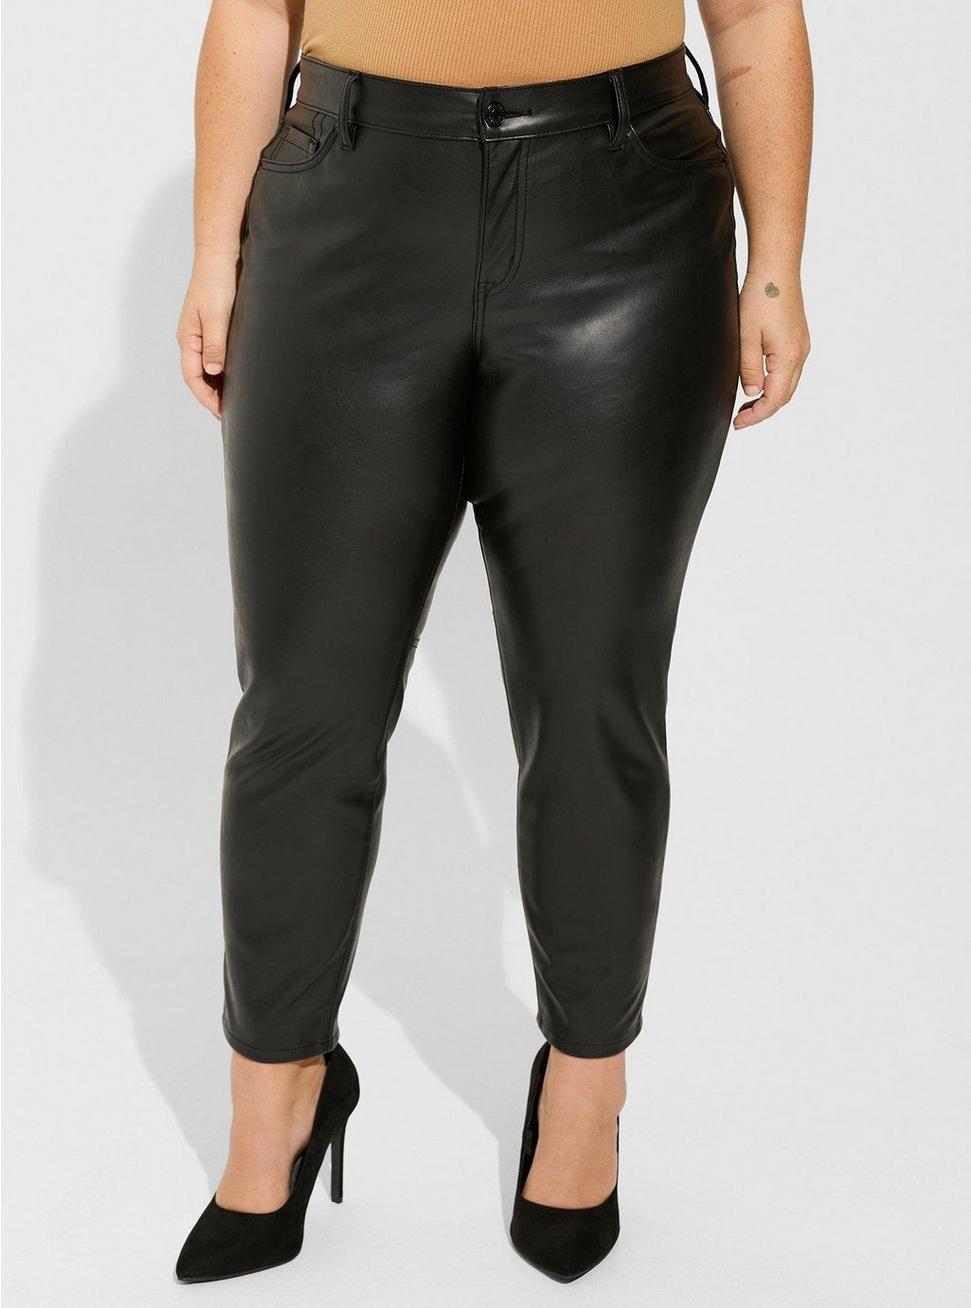 Plus Size Perfect Skinny Faux Leather High-Rise Pant, DEEP BLACK, alternate